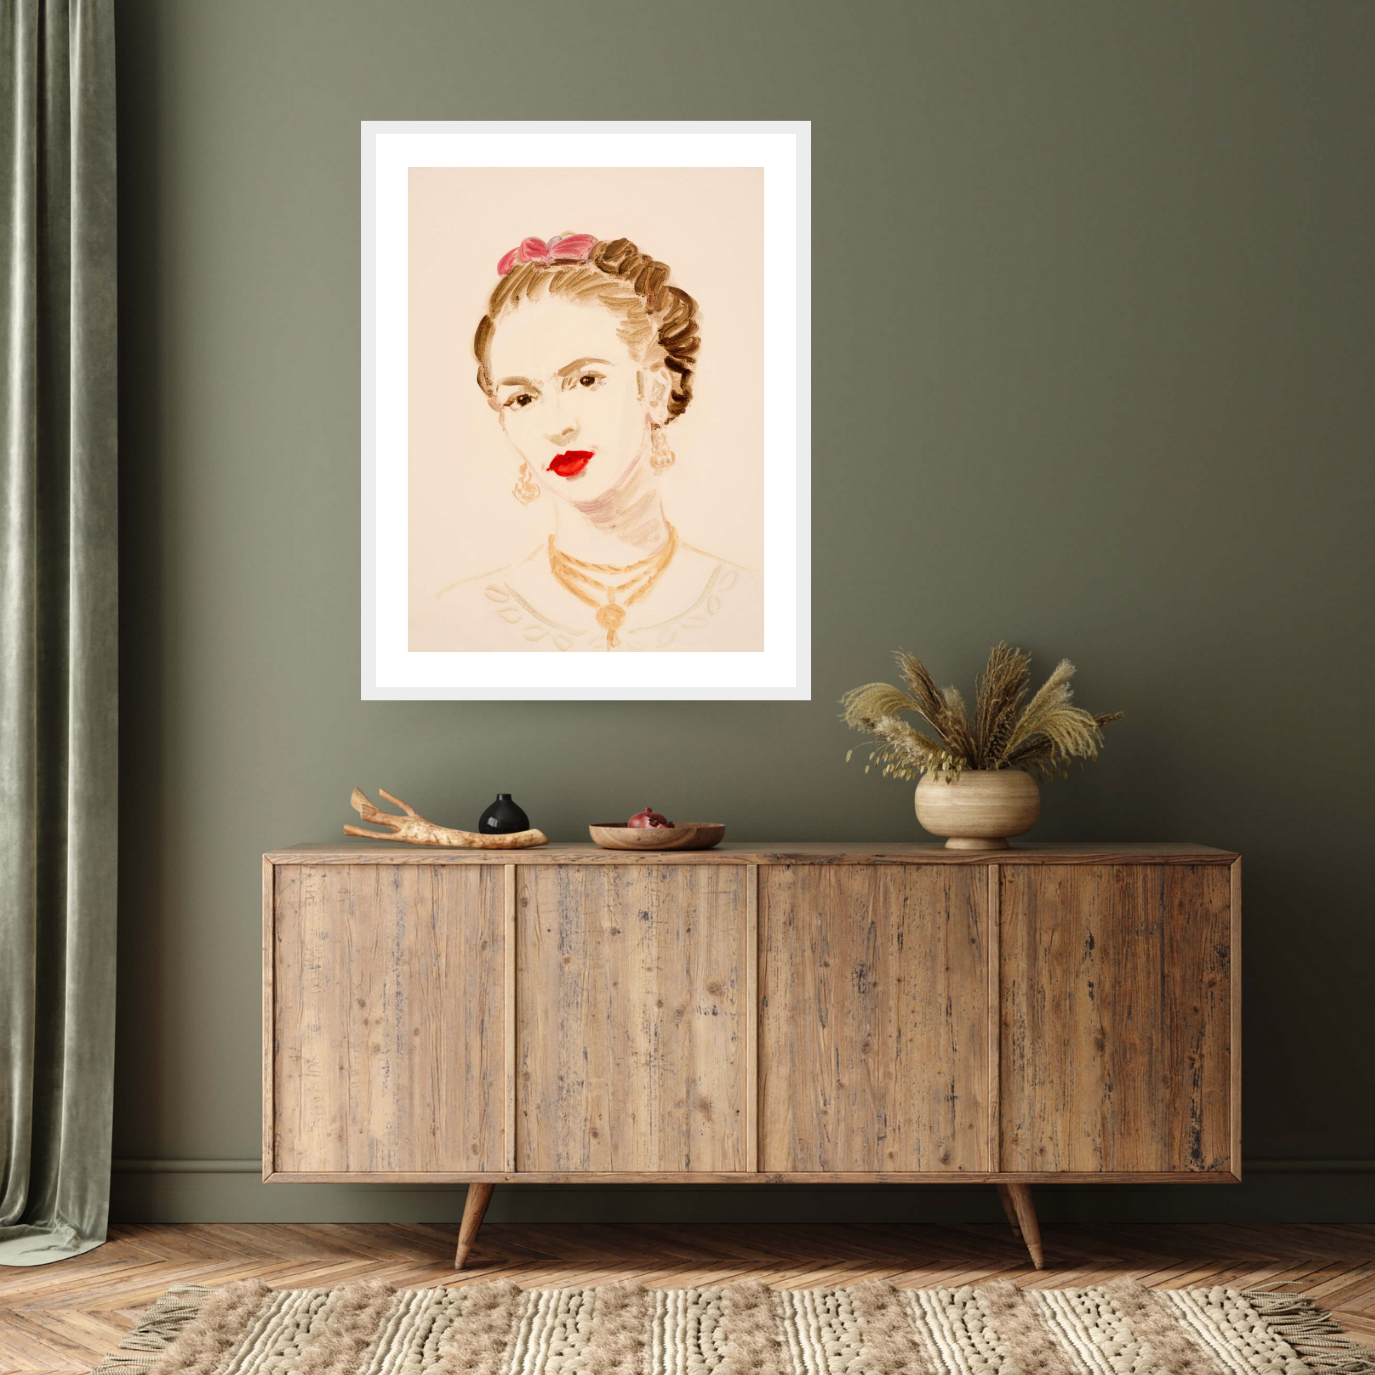 Image of the white framed print ‘Frida Kahlo’ by Annie Kevans, depicting the mexican artists Frida kahlo with her characteristic bright red lipstick 